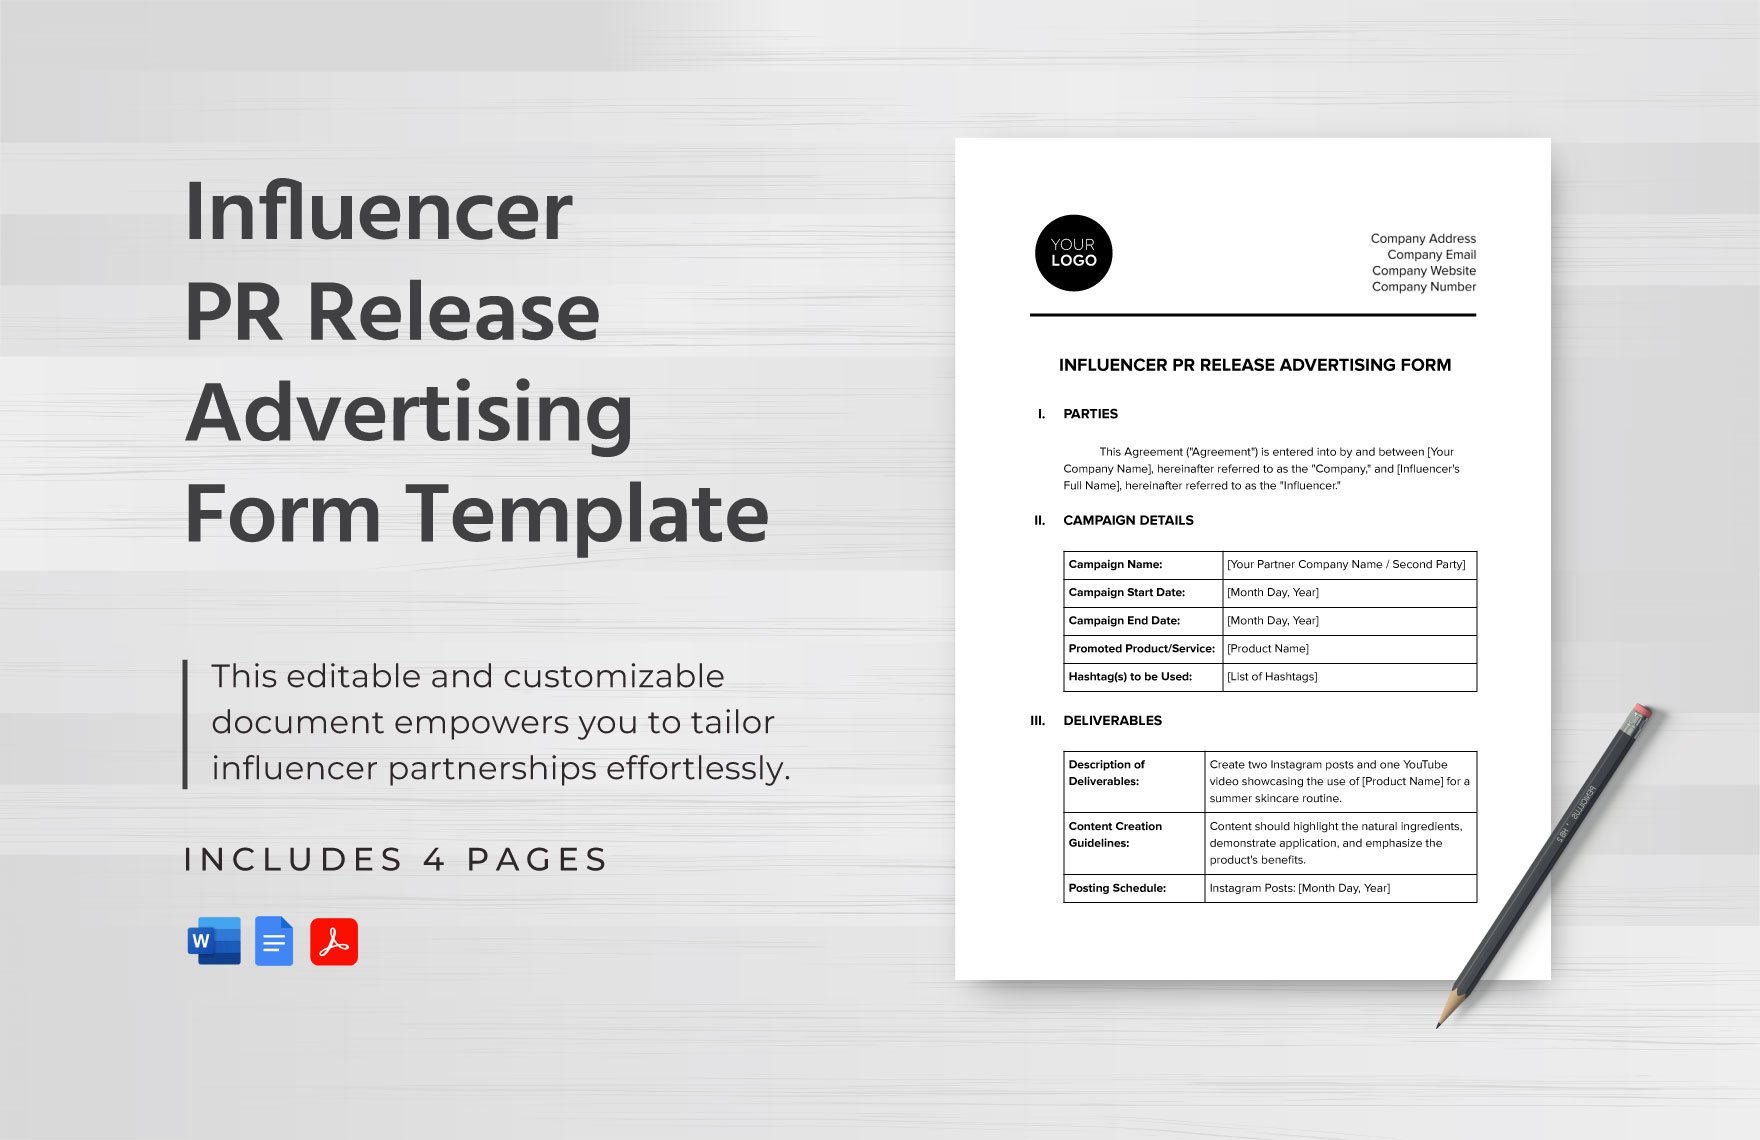 Influencer PR Release Advertising Form Template in Word, Google Docs, PDF